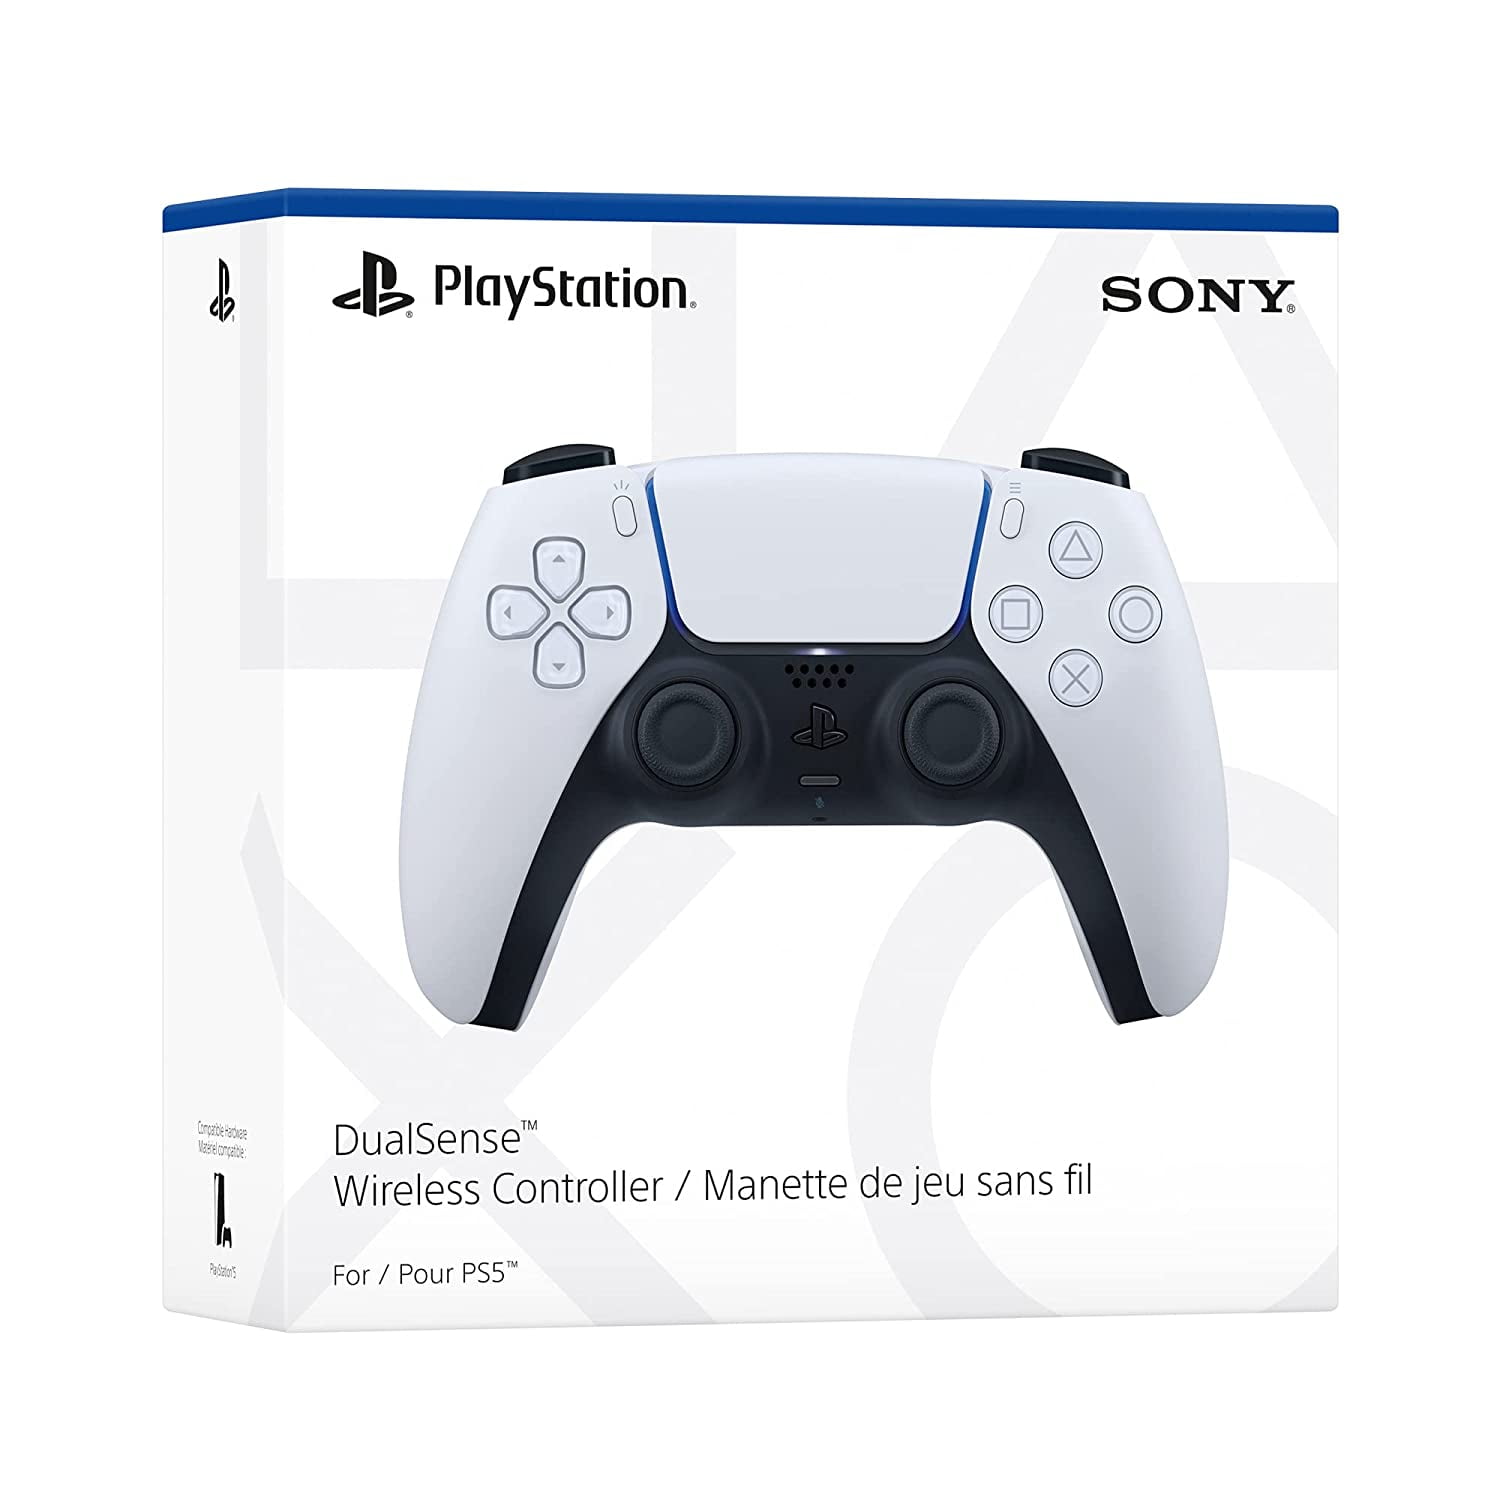 Sony Playstation 5 825GB Console Digital Version, Two White Wireless  Controllers, with Mazepoly Accessories